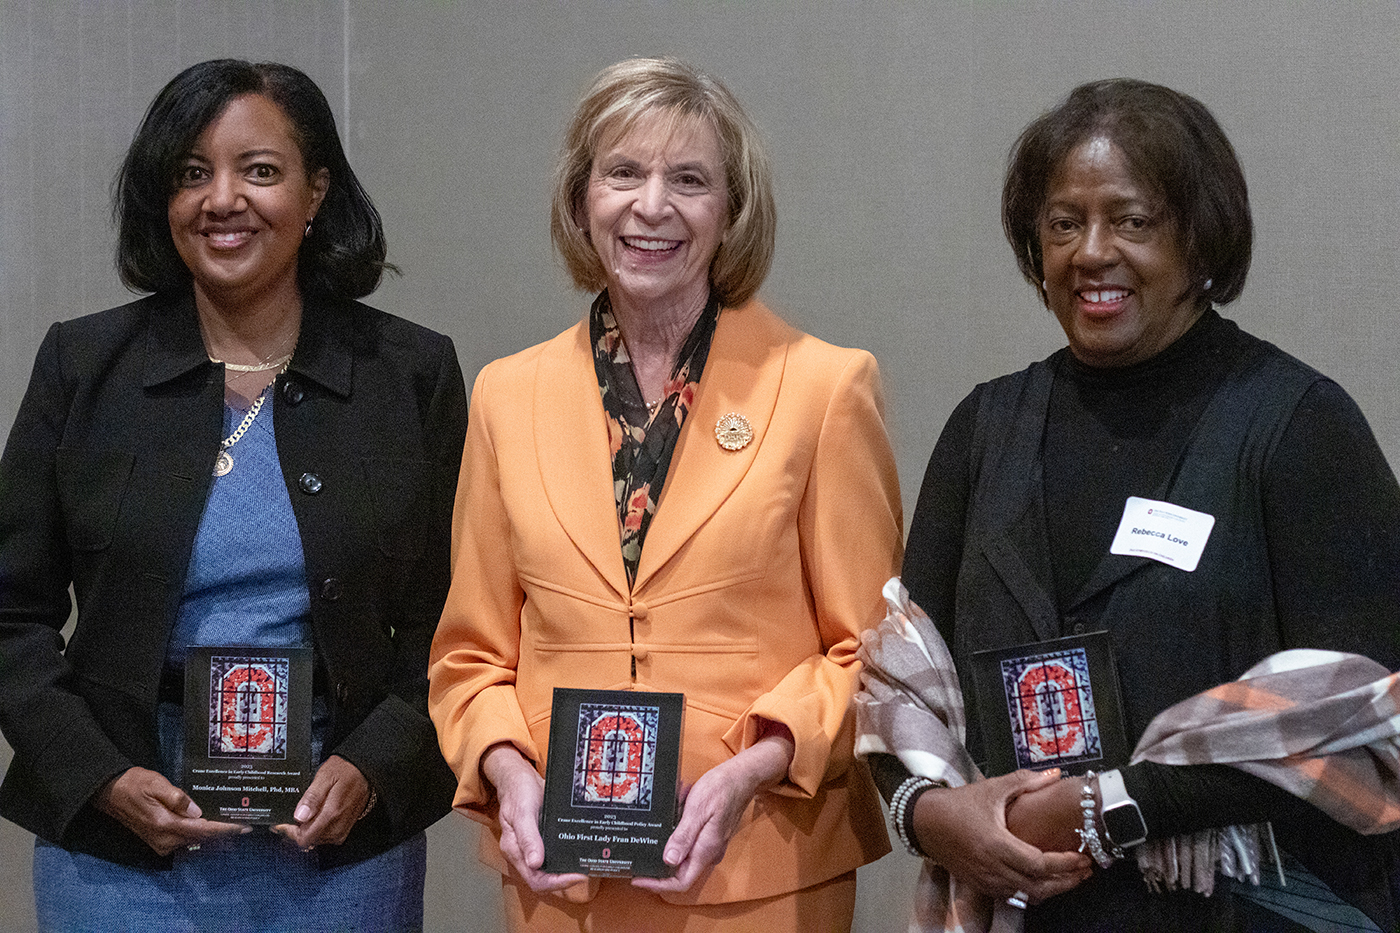 The recipients of the 2023 Crane Excellence in Early Childhood Awards: From left, Dr. Monica Johnson Mitchell, professor of pediatrics at Cincinnati Children’s Hospital; Fran DeWine, First Lady of Ohio; and Rebecca Love, director of Early Childhood Education for the Franklin County Board of Developmental Disabilities. The three women are standing facing the camera. Each is holding the award plaque, which shows an image of a "Block O," the logo for The Ohio State University.